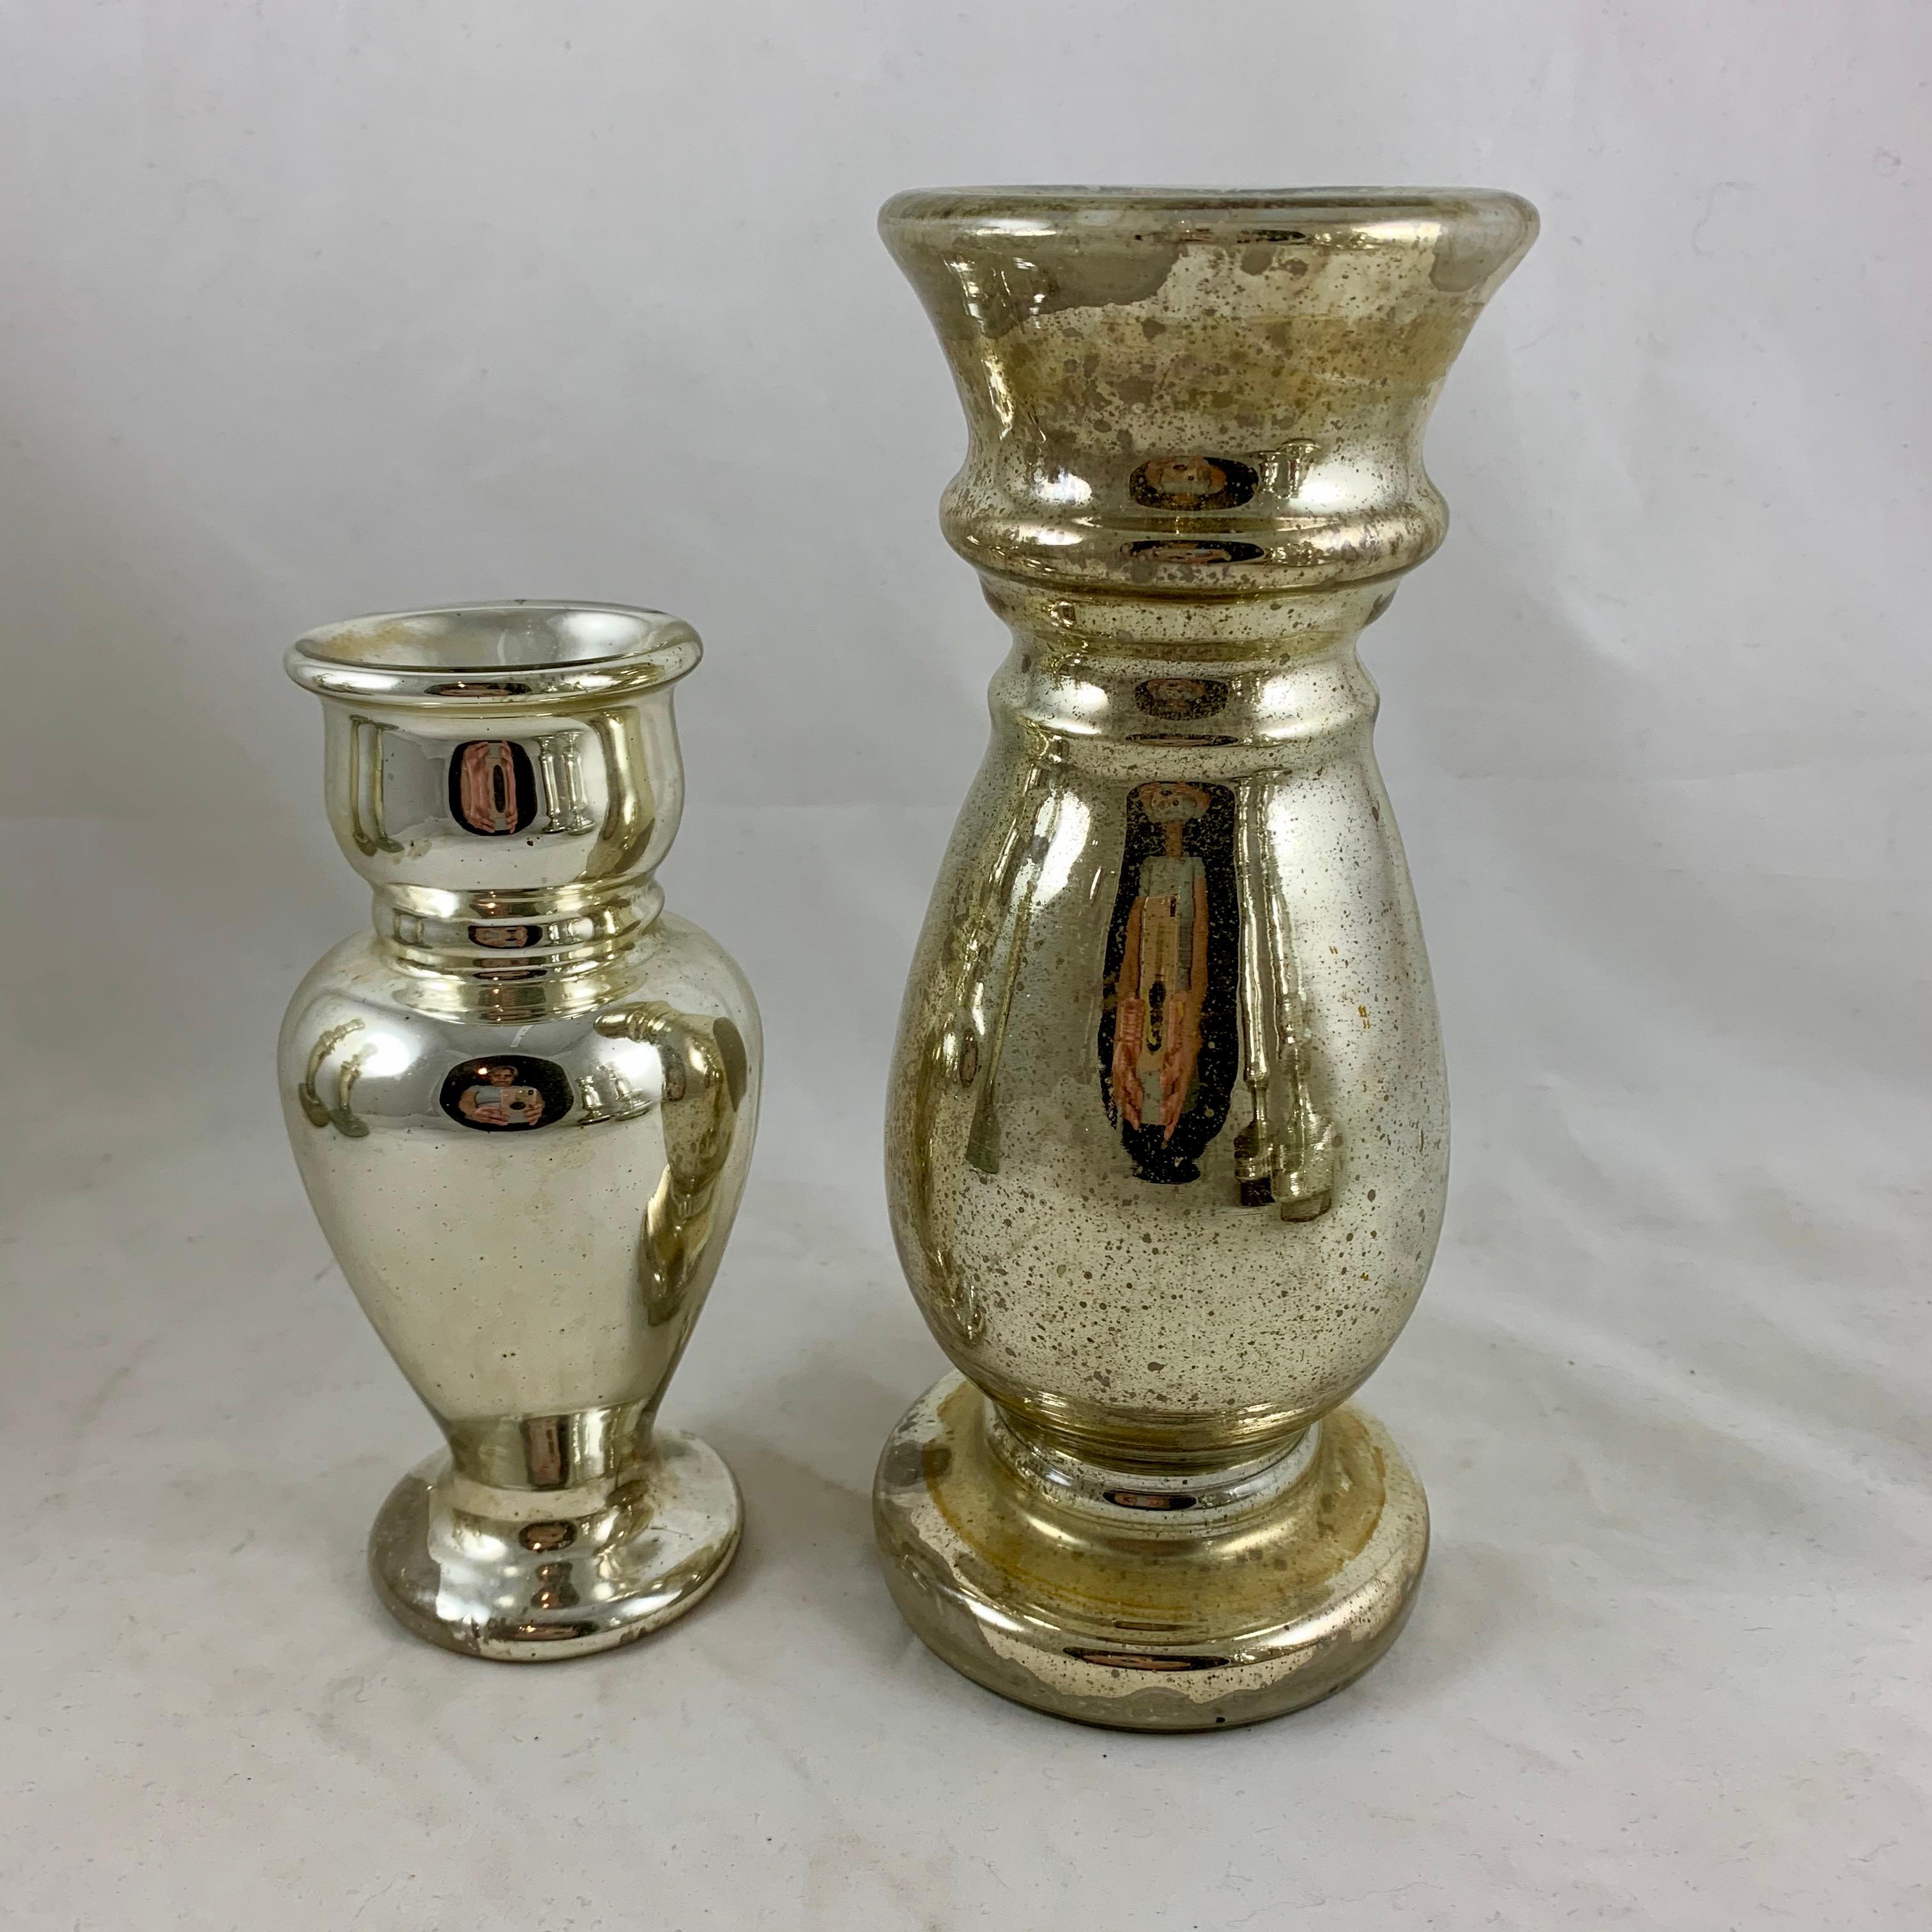 English Blown Mercury Glass Silvered Candlesticks, Collection of Six, circa 1850 For Sale 1